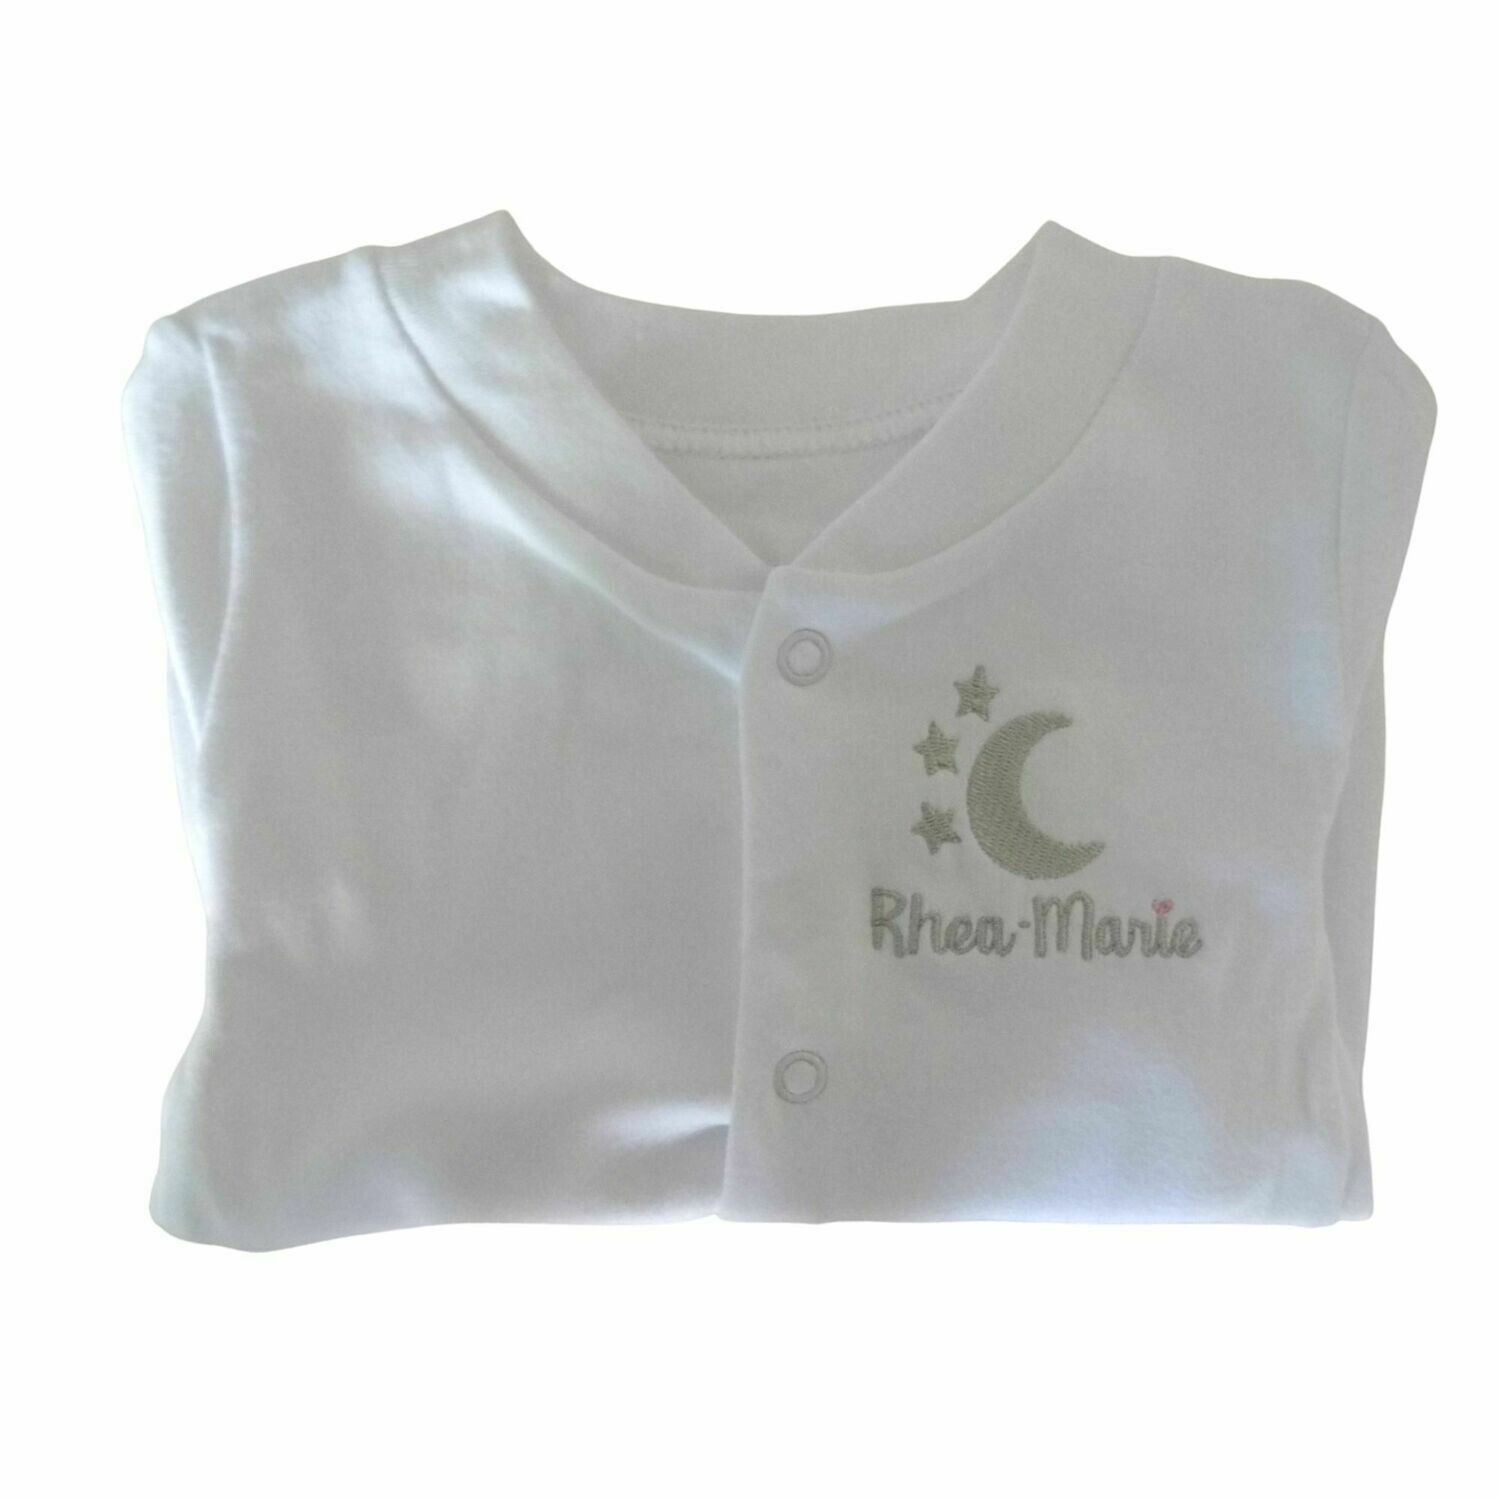 Embroidered Personalised Baby Sleepsuit with Moon and Stars